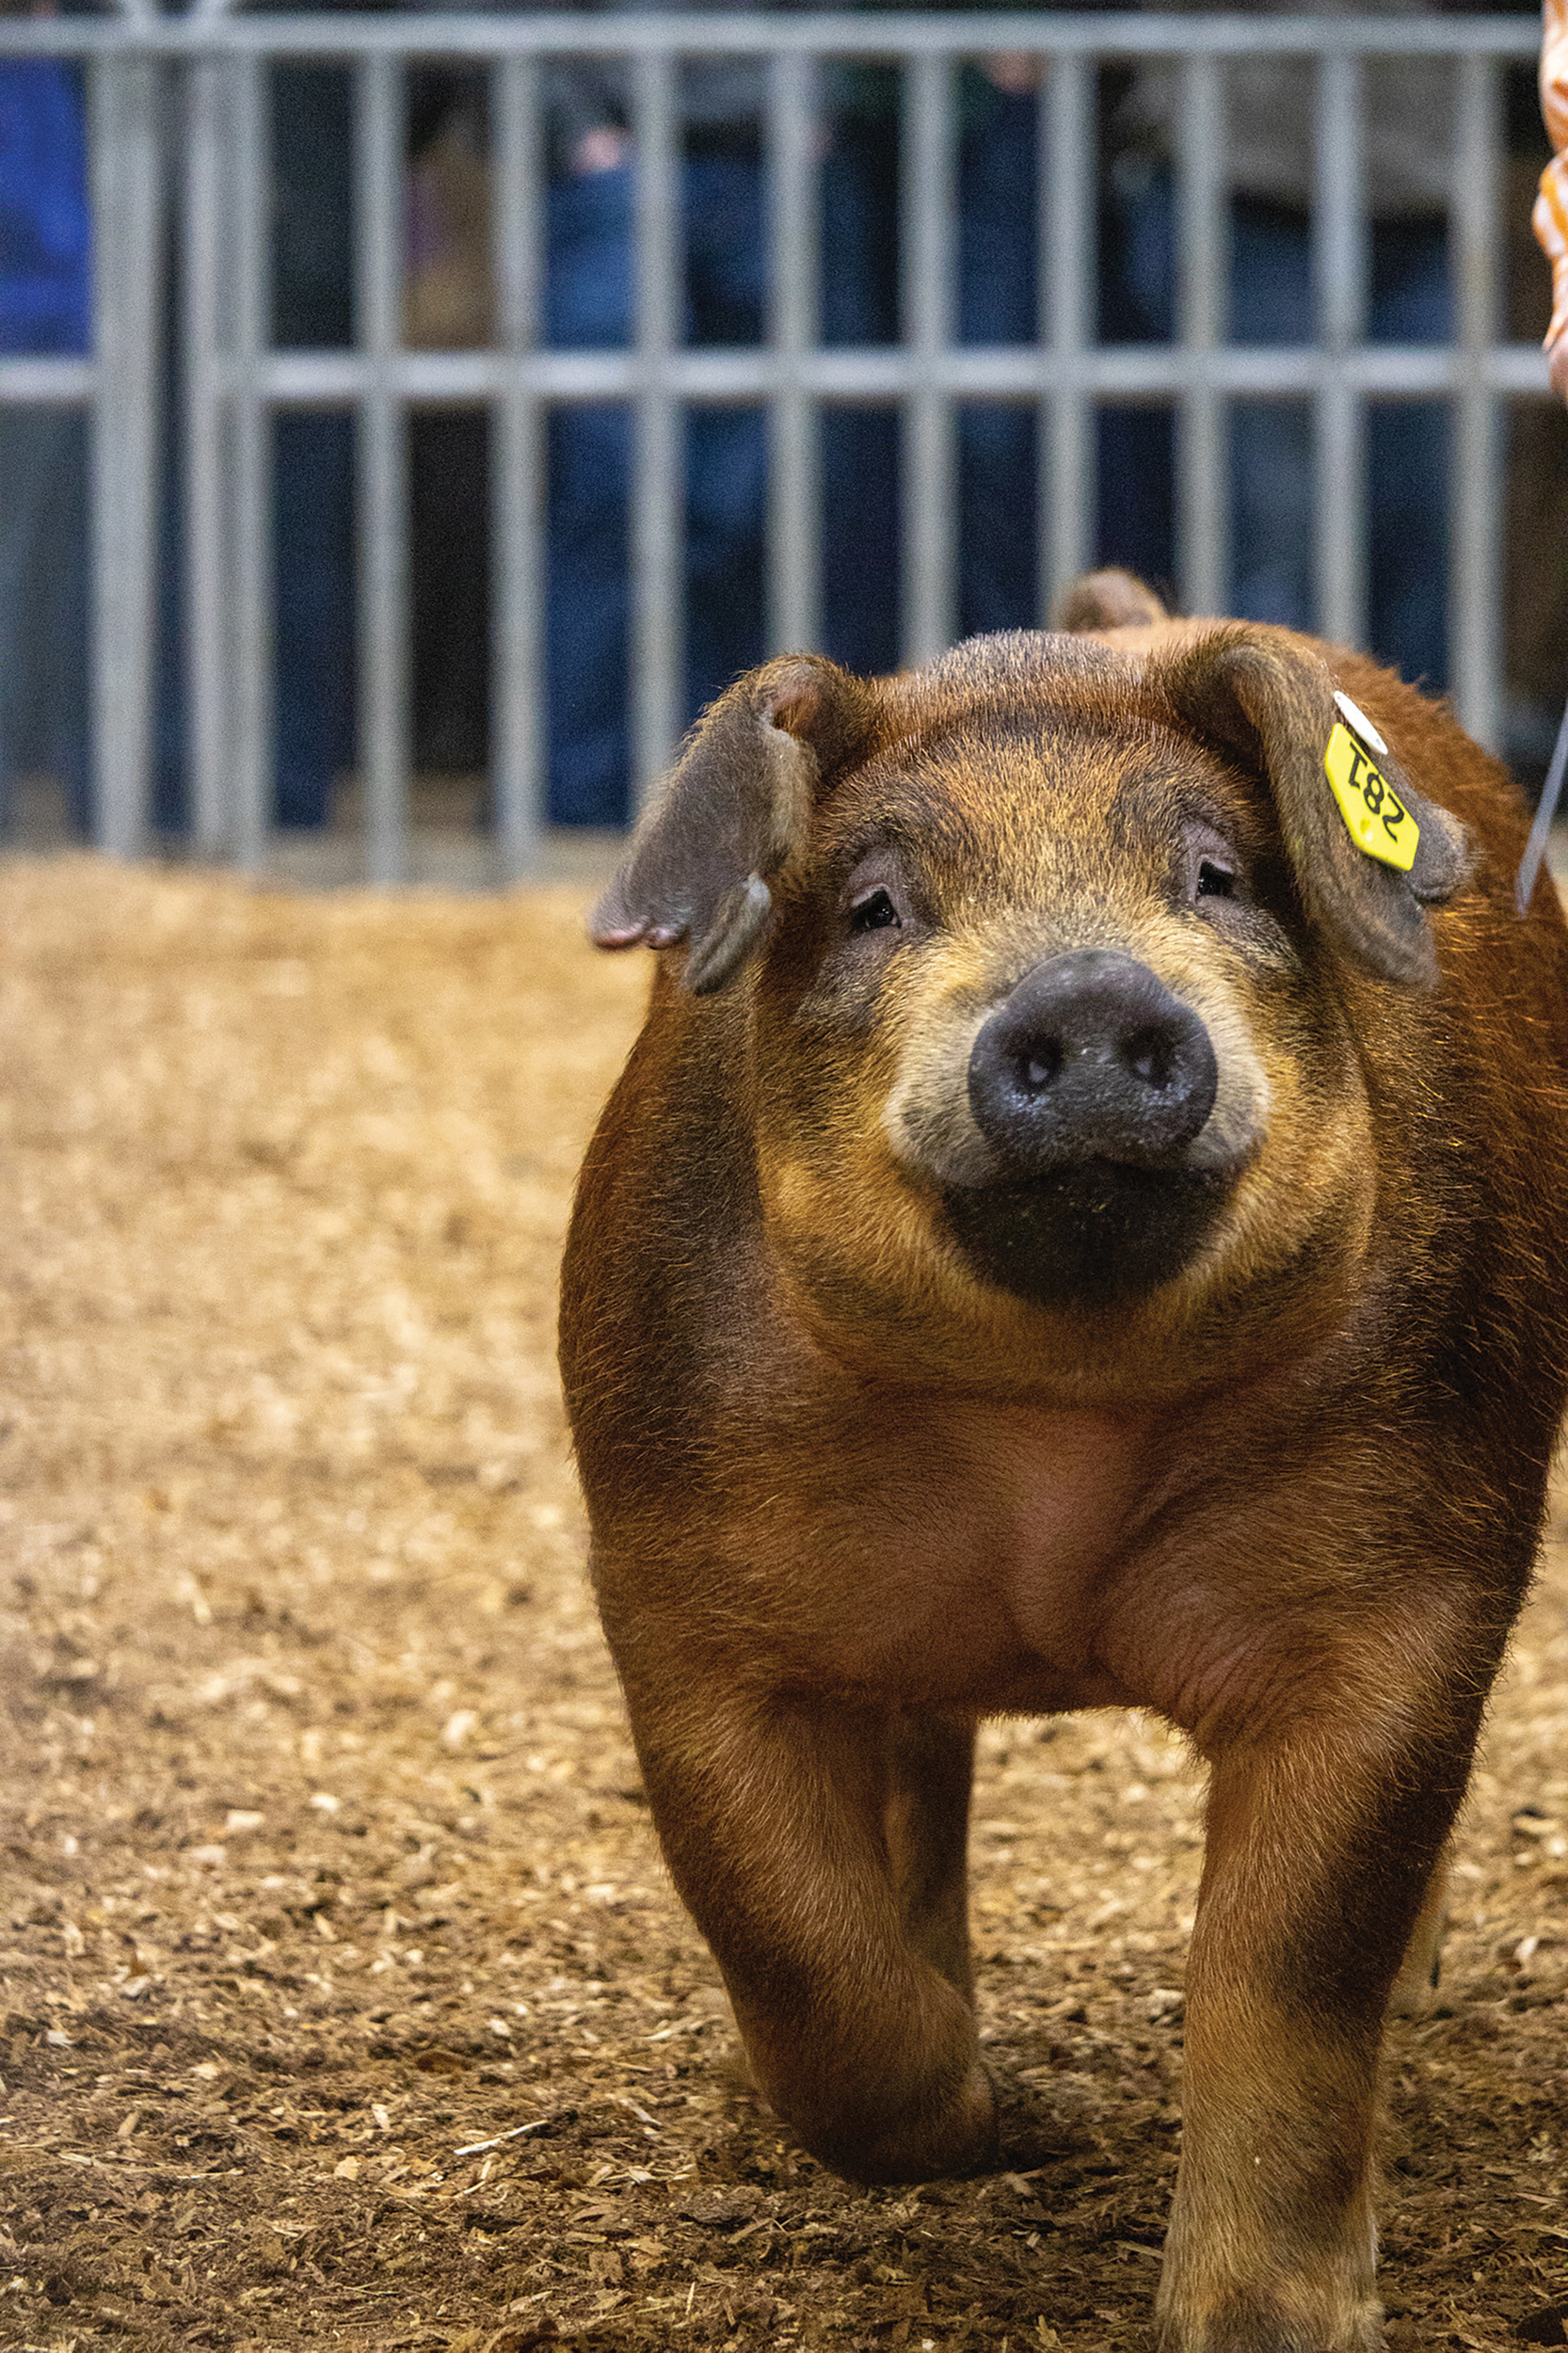 Pigs, cattle, horses, bunnies, goats and more are always part of the Farm Show festivities.